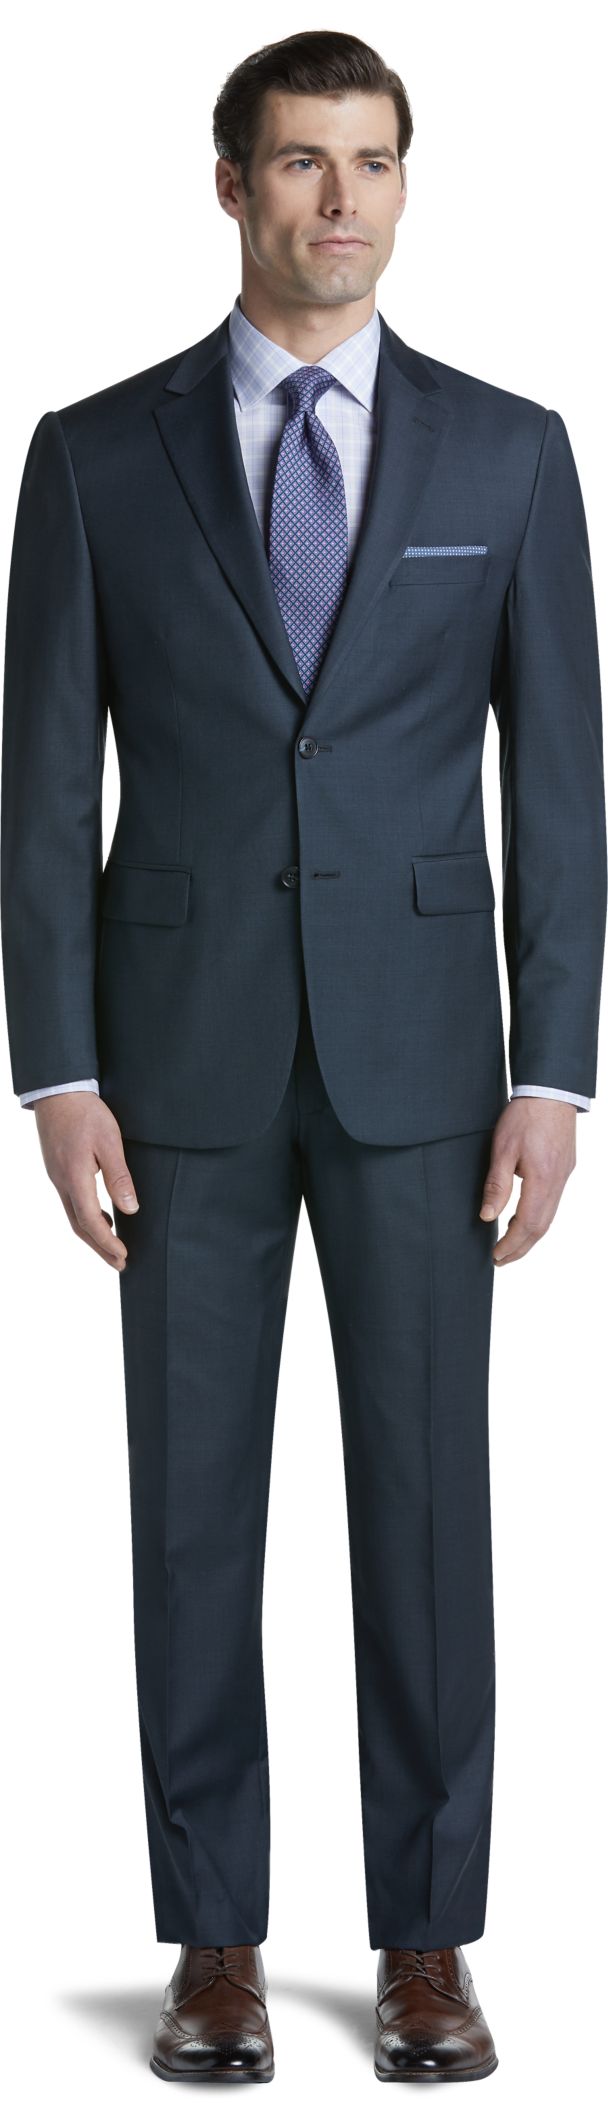 Traveler Tailored Fit Sharkskin Suit CLEARANCE - All Clearance | Jos A Bank